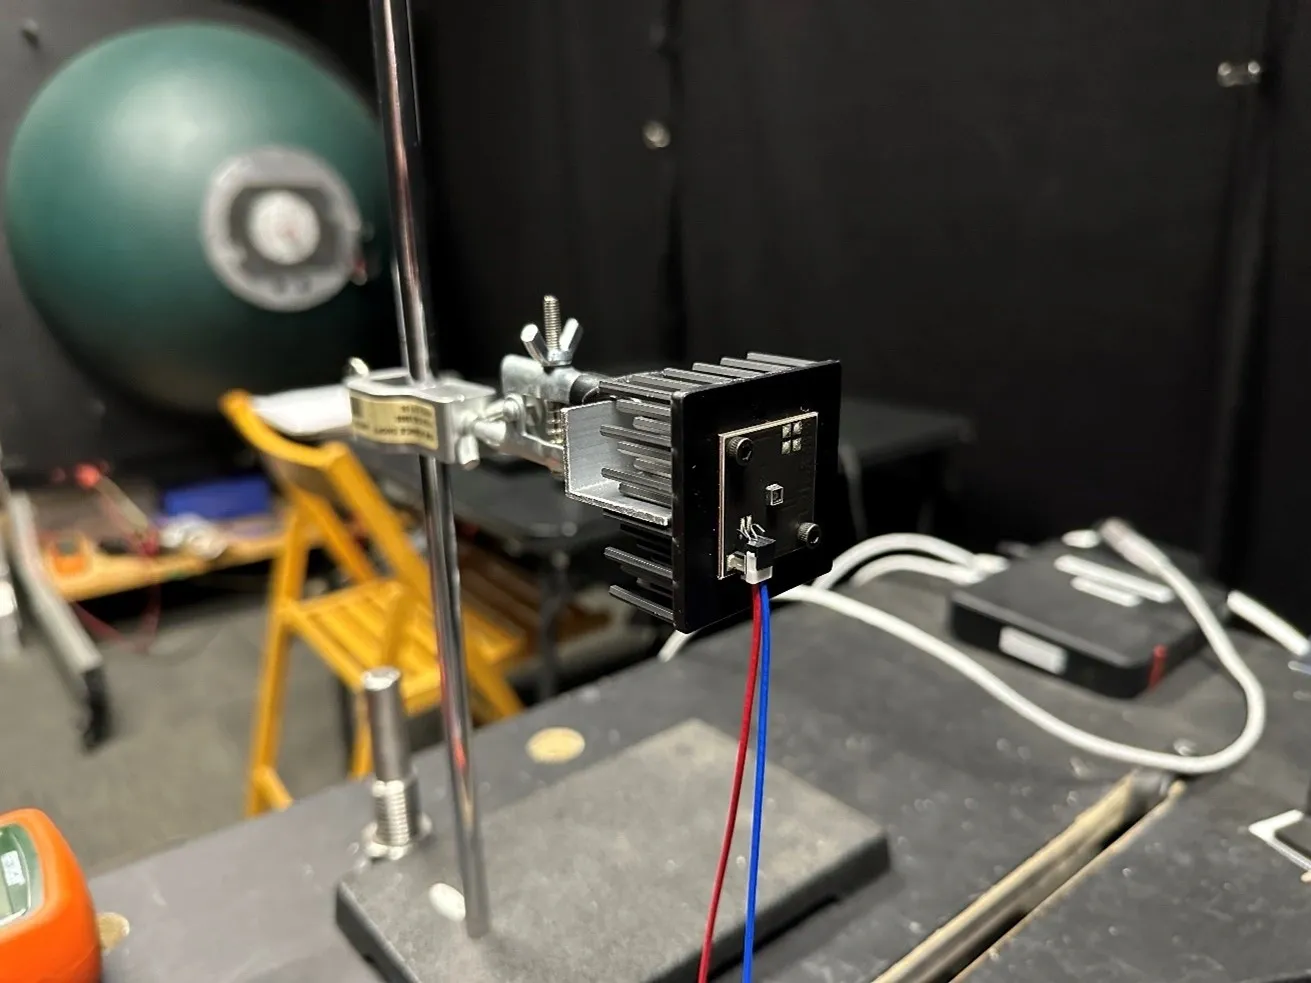 A small device is being used to measure the speed of an object.